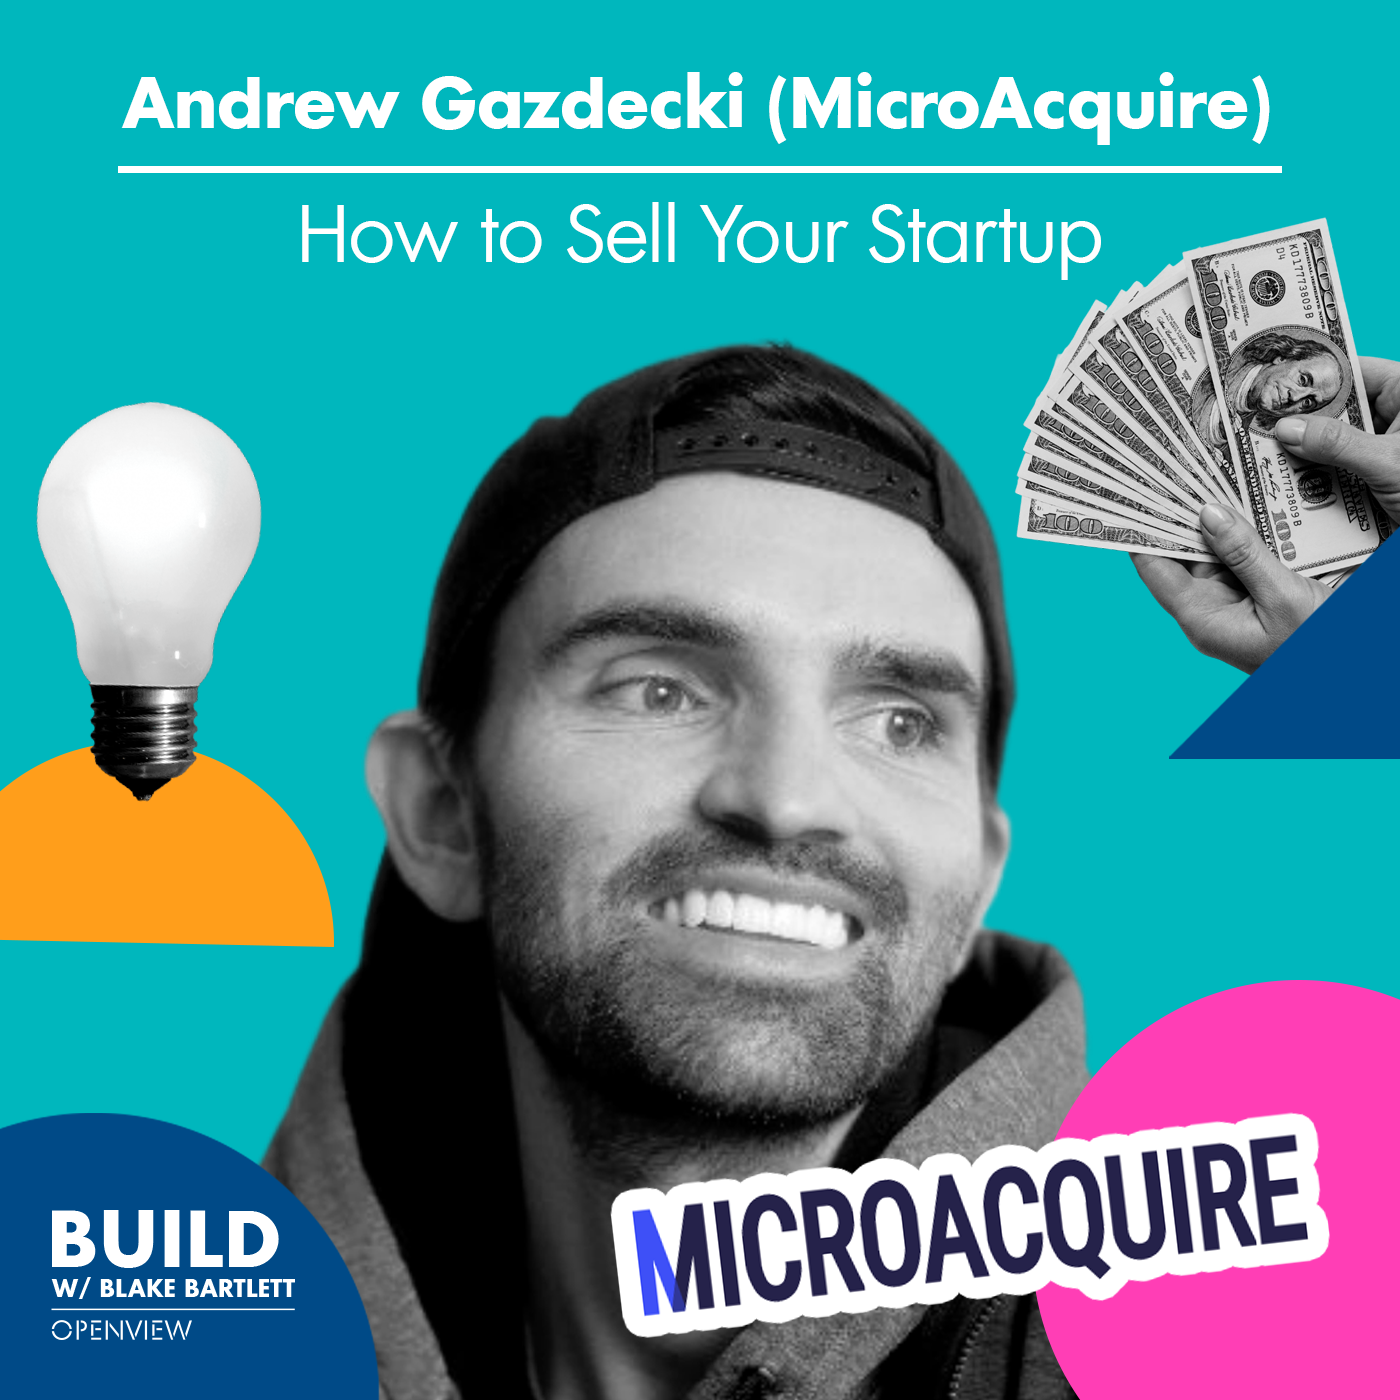 Andrew Gazdecki (MicroAcquire): How to Sell Your Startup